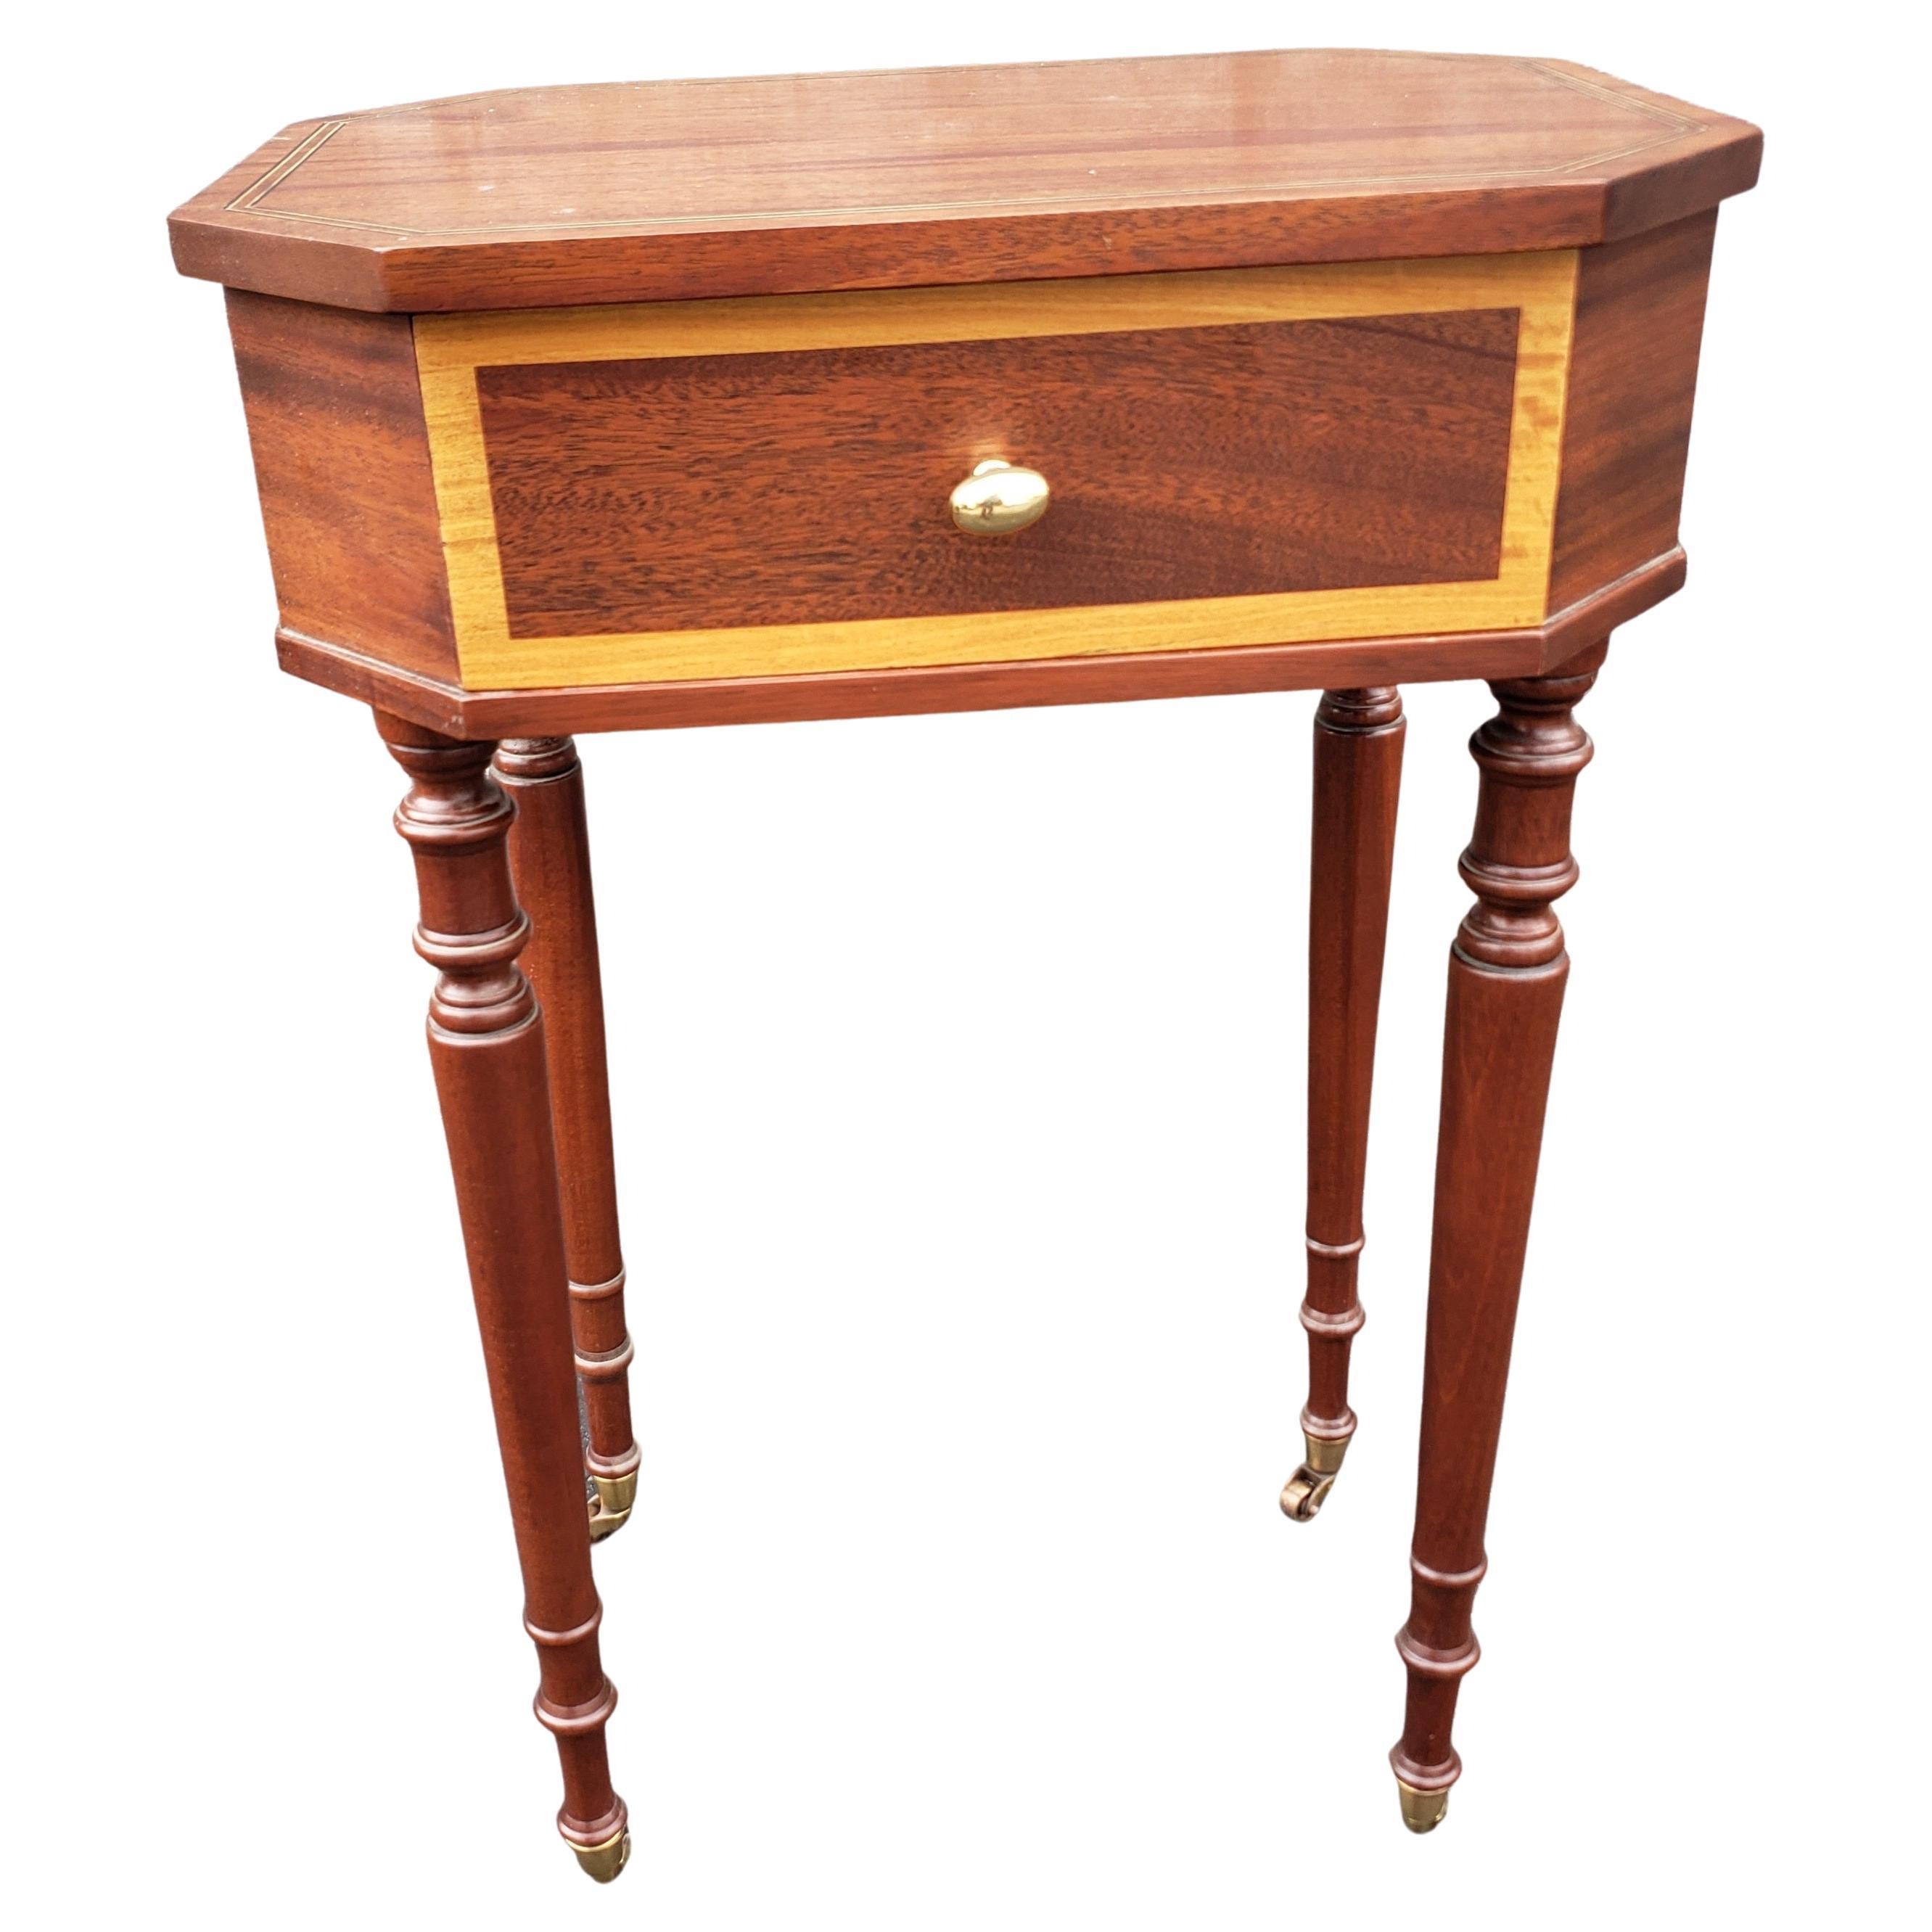  Mahogany Satinwood Banded Inlay Inlay Single Drawer Side Table on Wheels For Sale